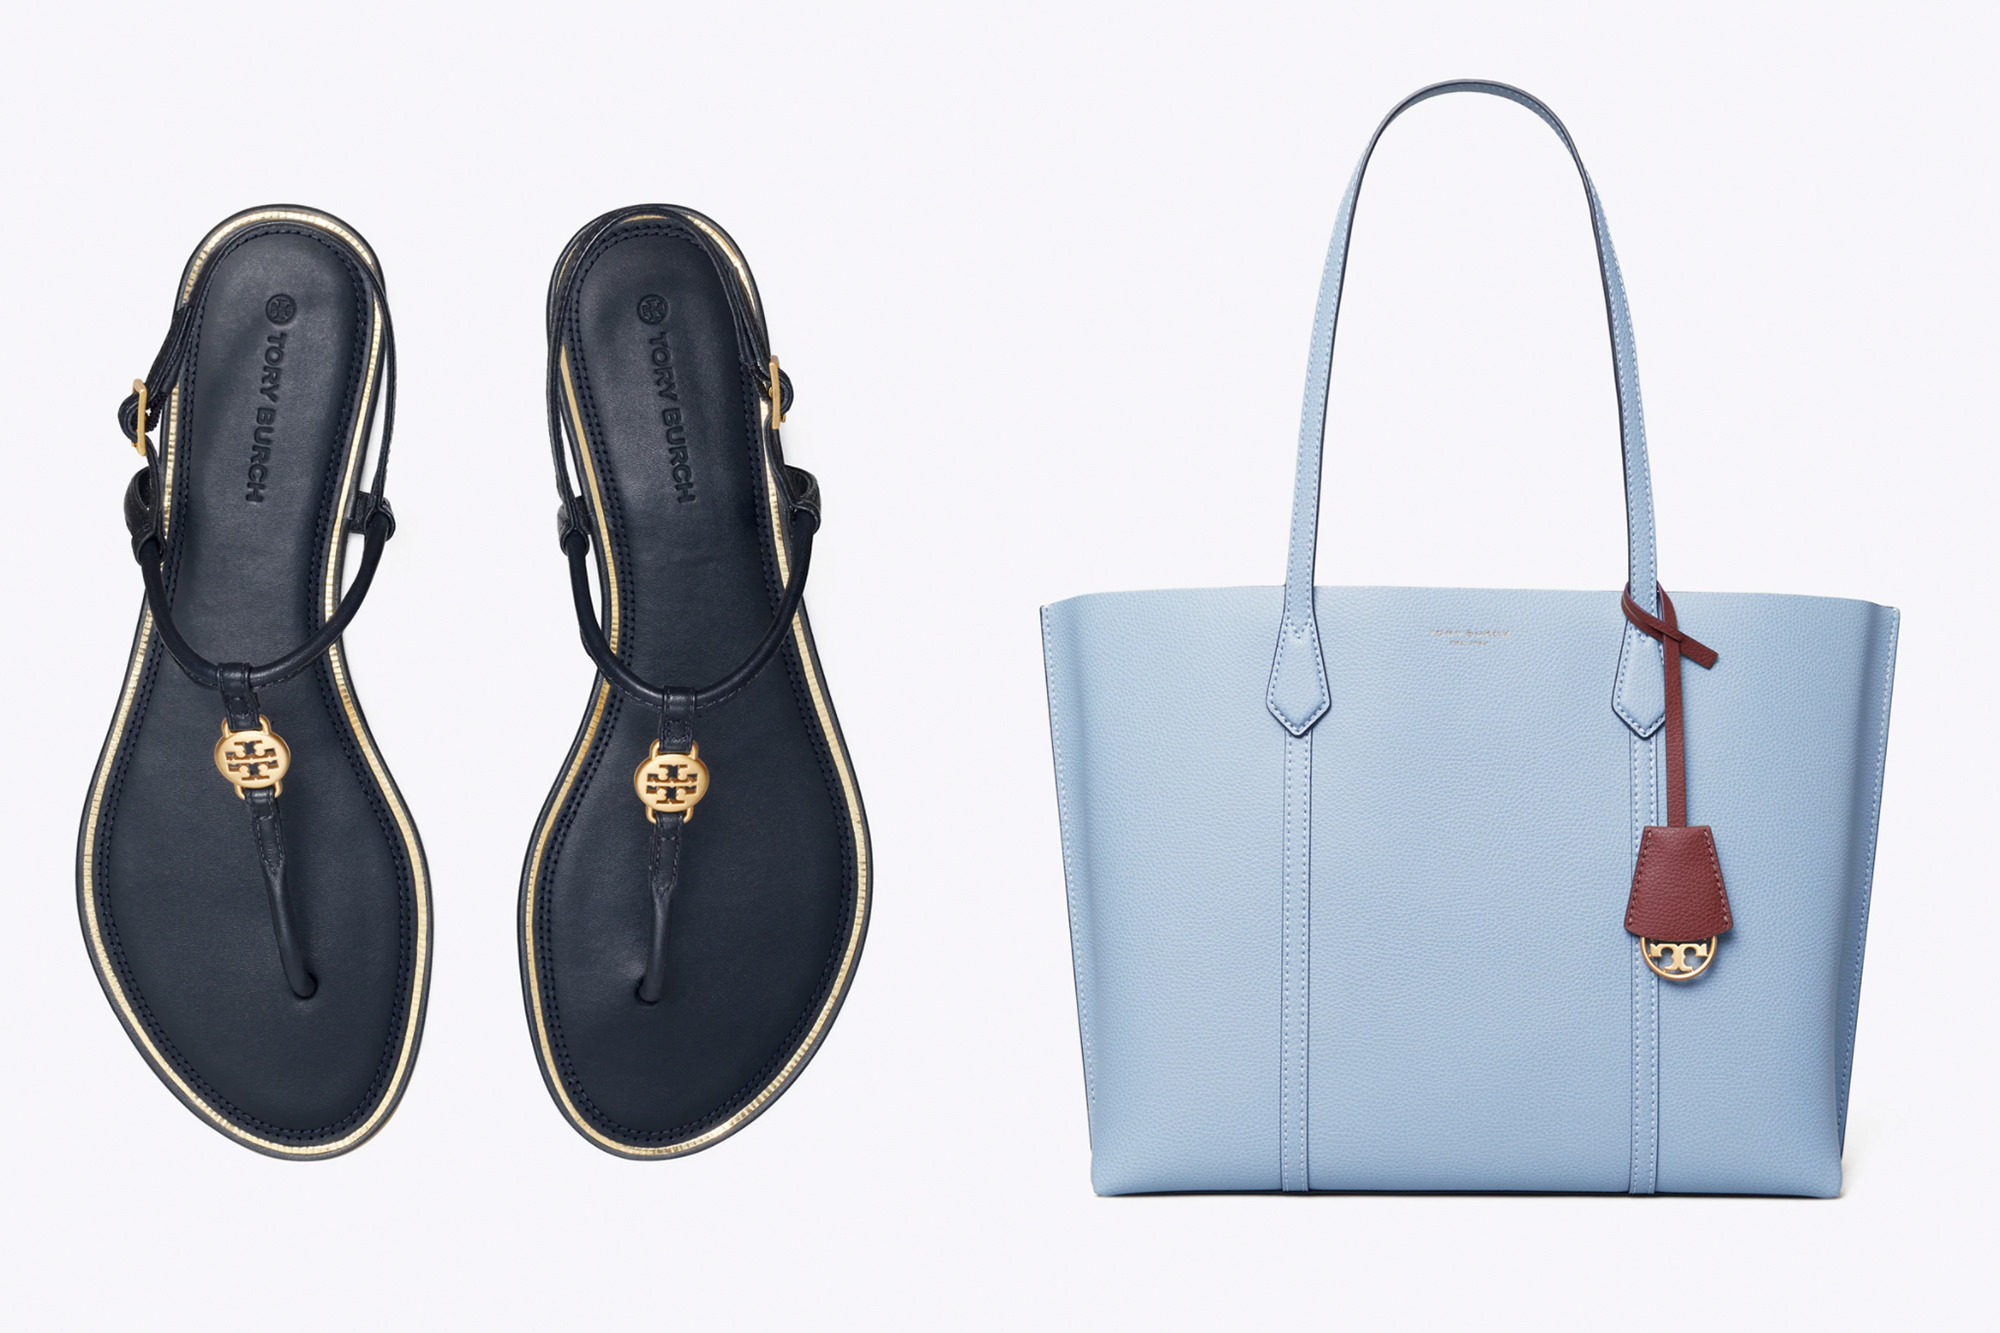 Tory Burch Has Sandals and Accessories on Sale Starting at $9